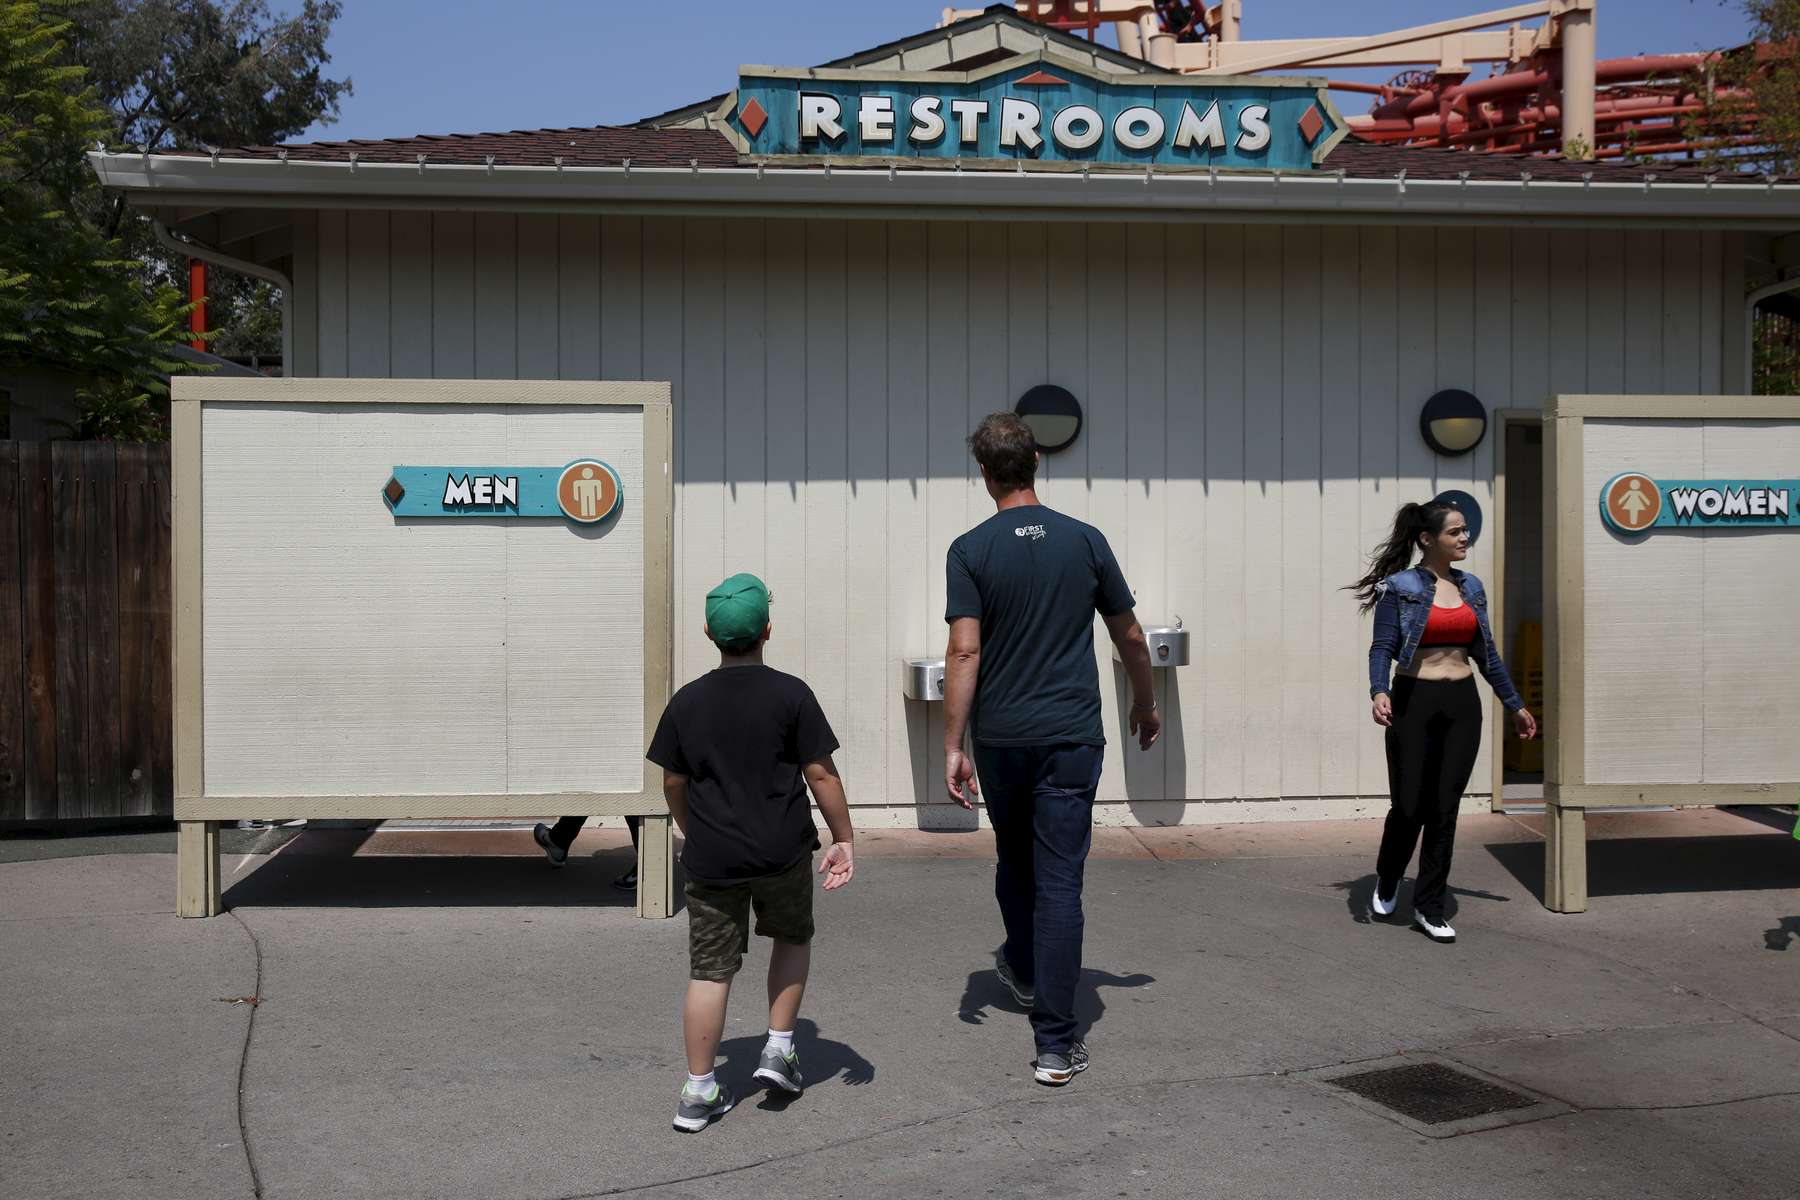 James, 8, and Ben Kaplan walk towards the men's bathroom together while enjoying a family outing to Six Flags amusement park Aug. 20, 2016 in Vallejo, Calif.